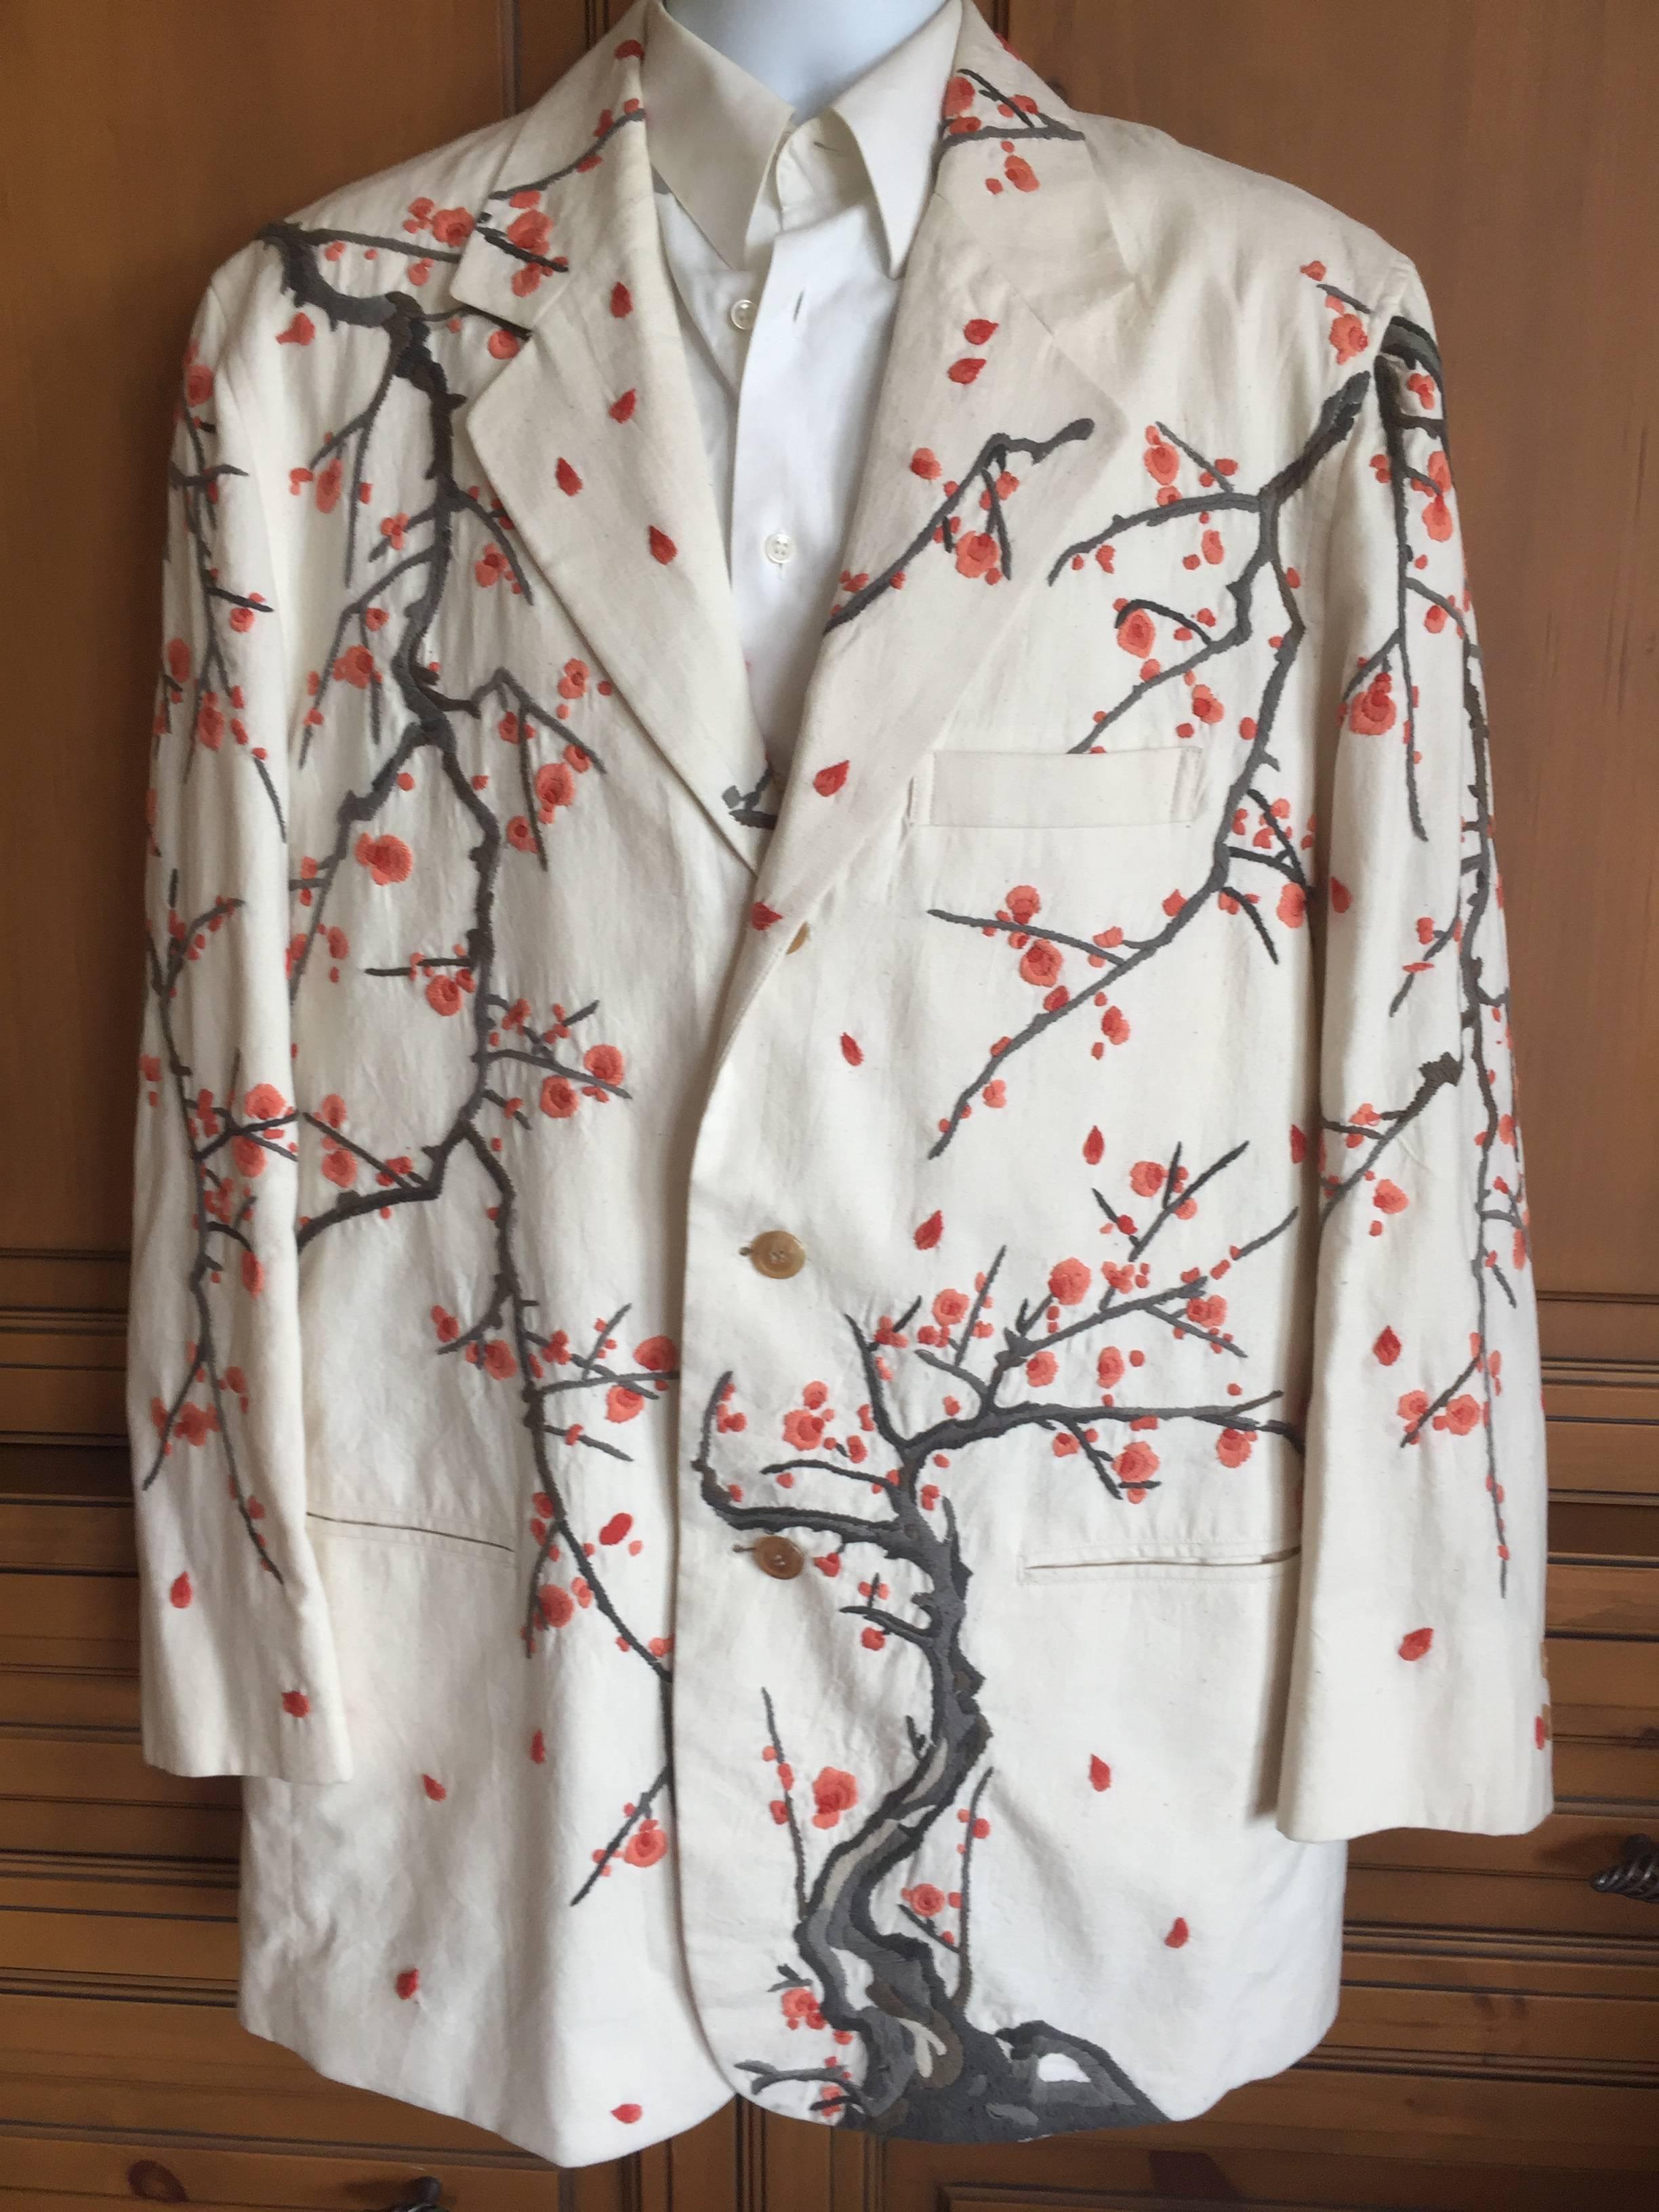 Issey Miyake for Bergdorf Goodman Vintage Embroidered Mens Cherry Blossom Jacket.
Pure cotton, this is so beautiful.
Chest 50